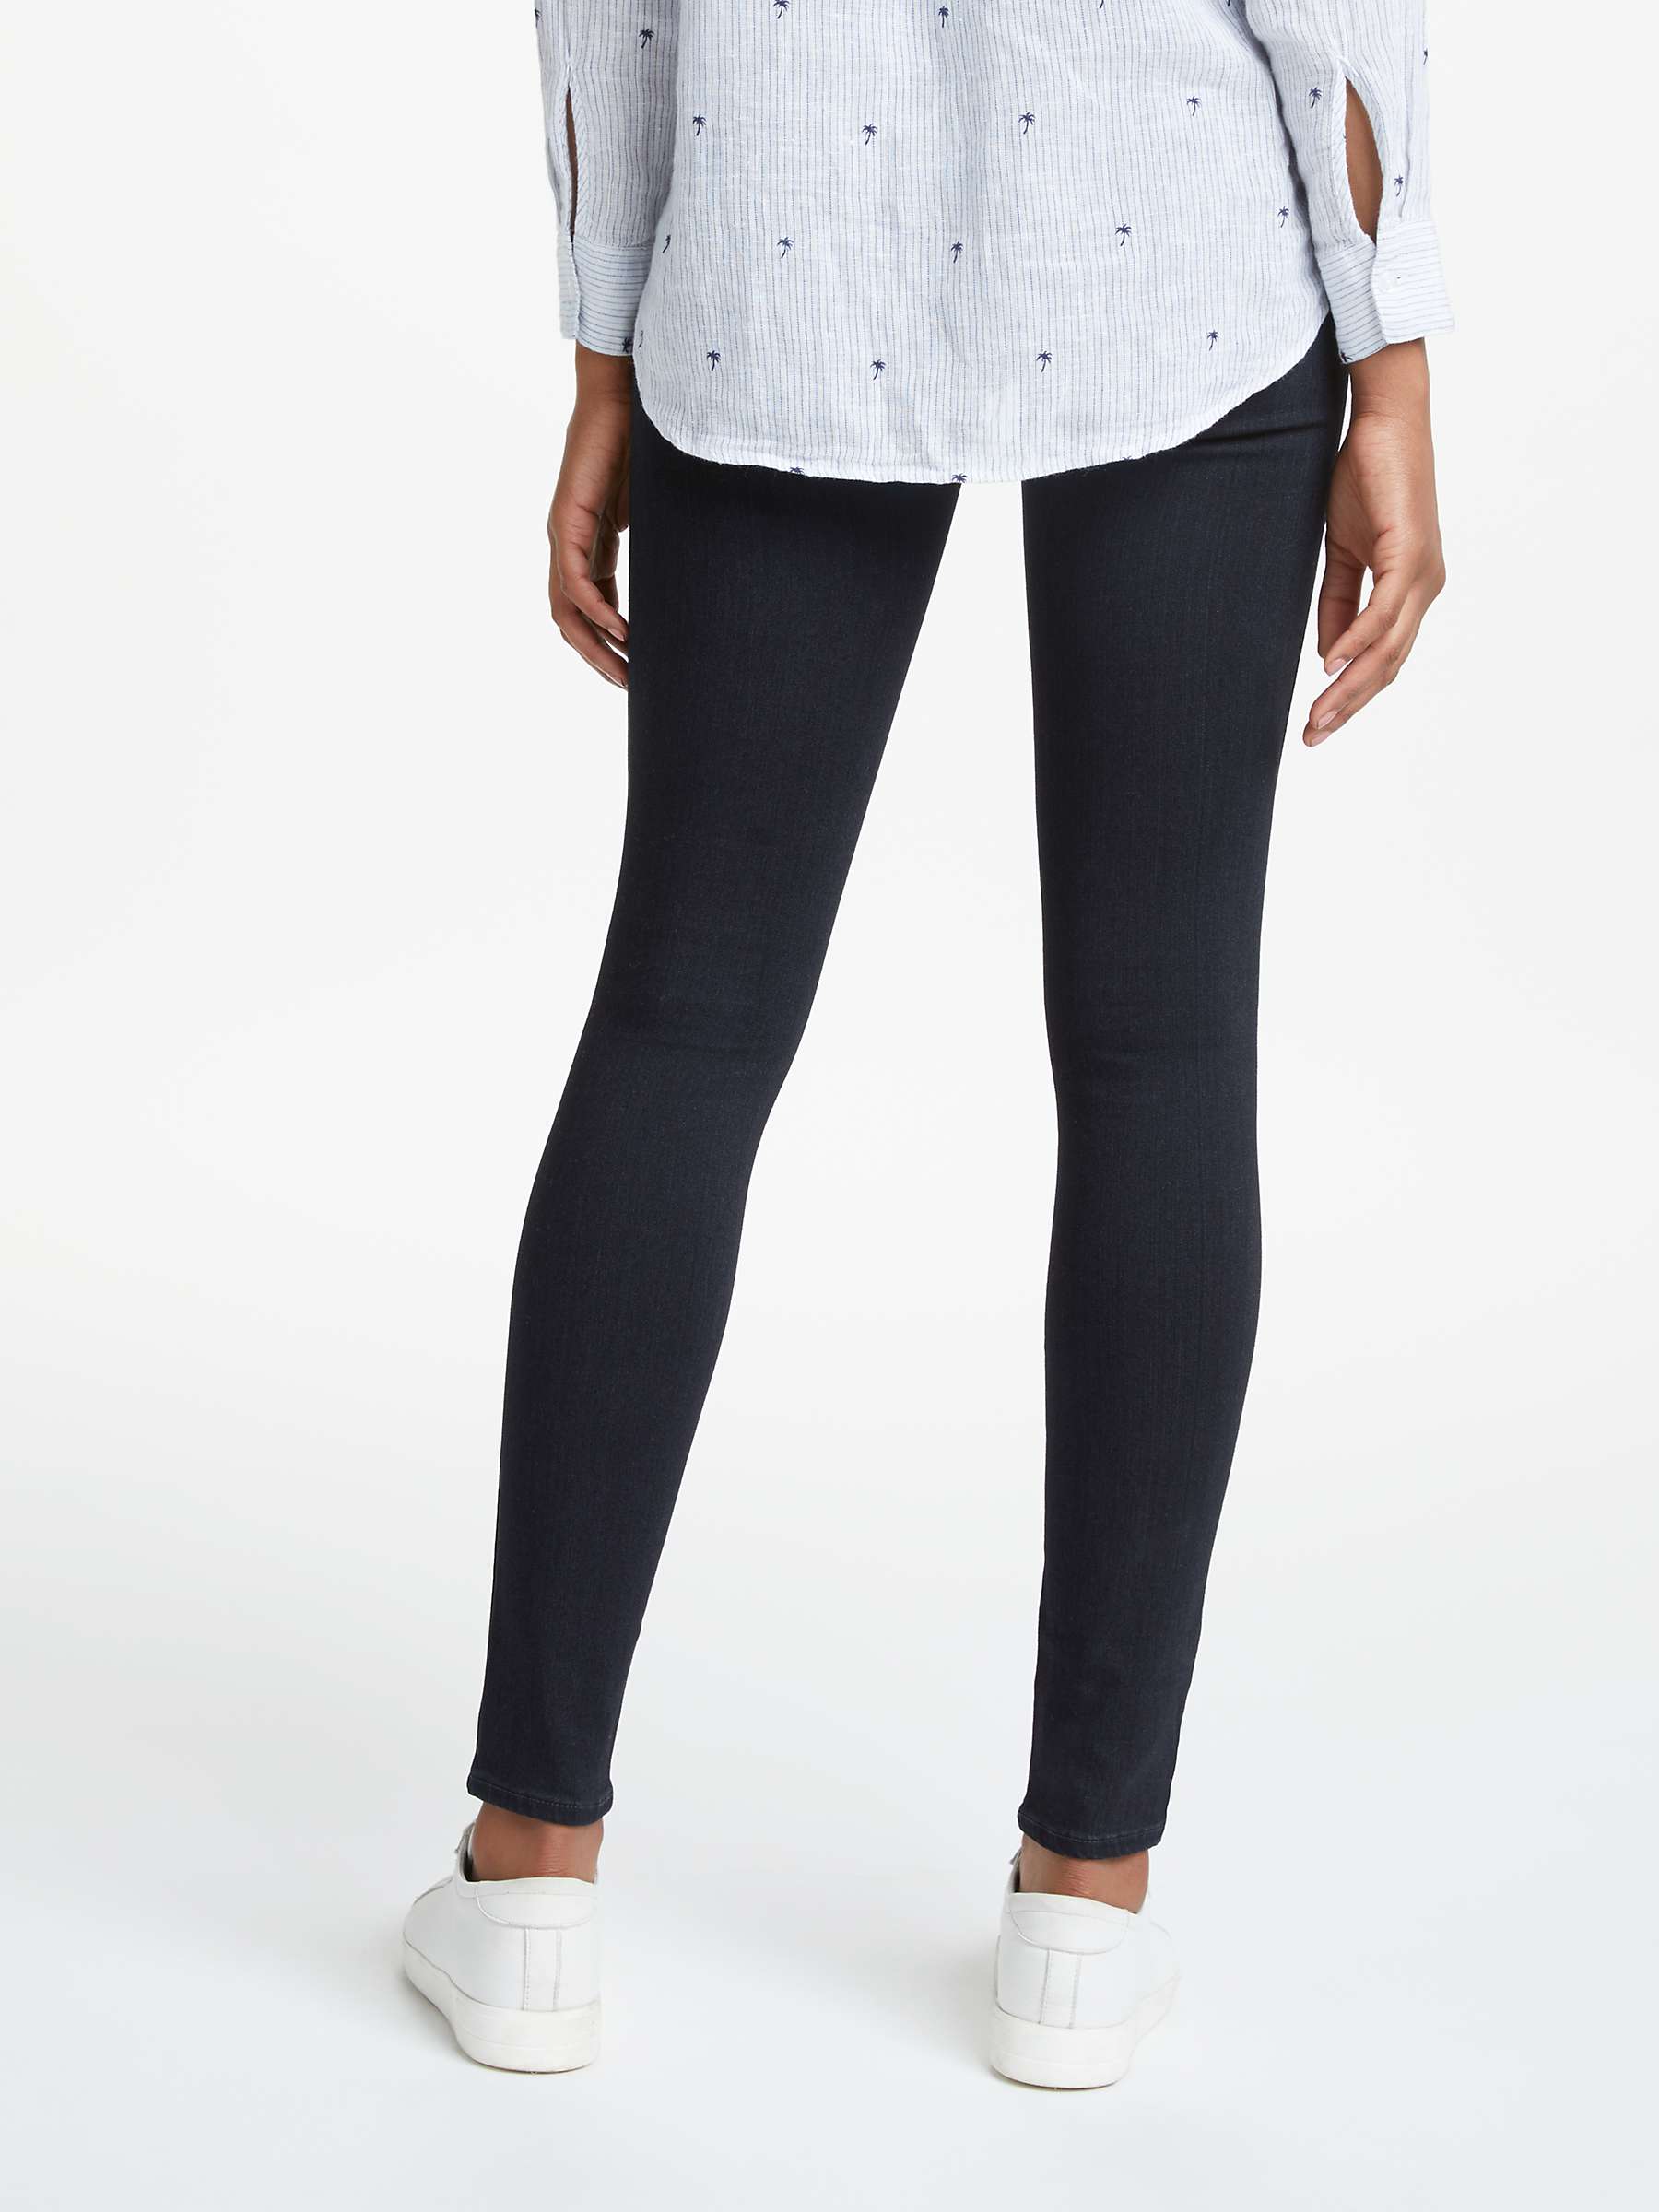 Buy PAIGE Margot High Rise Ultra Skinny Jeans, Tonal Mona Online at johnlewis.com